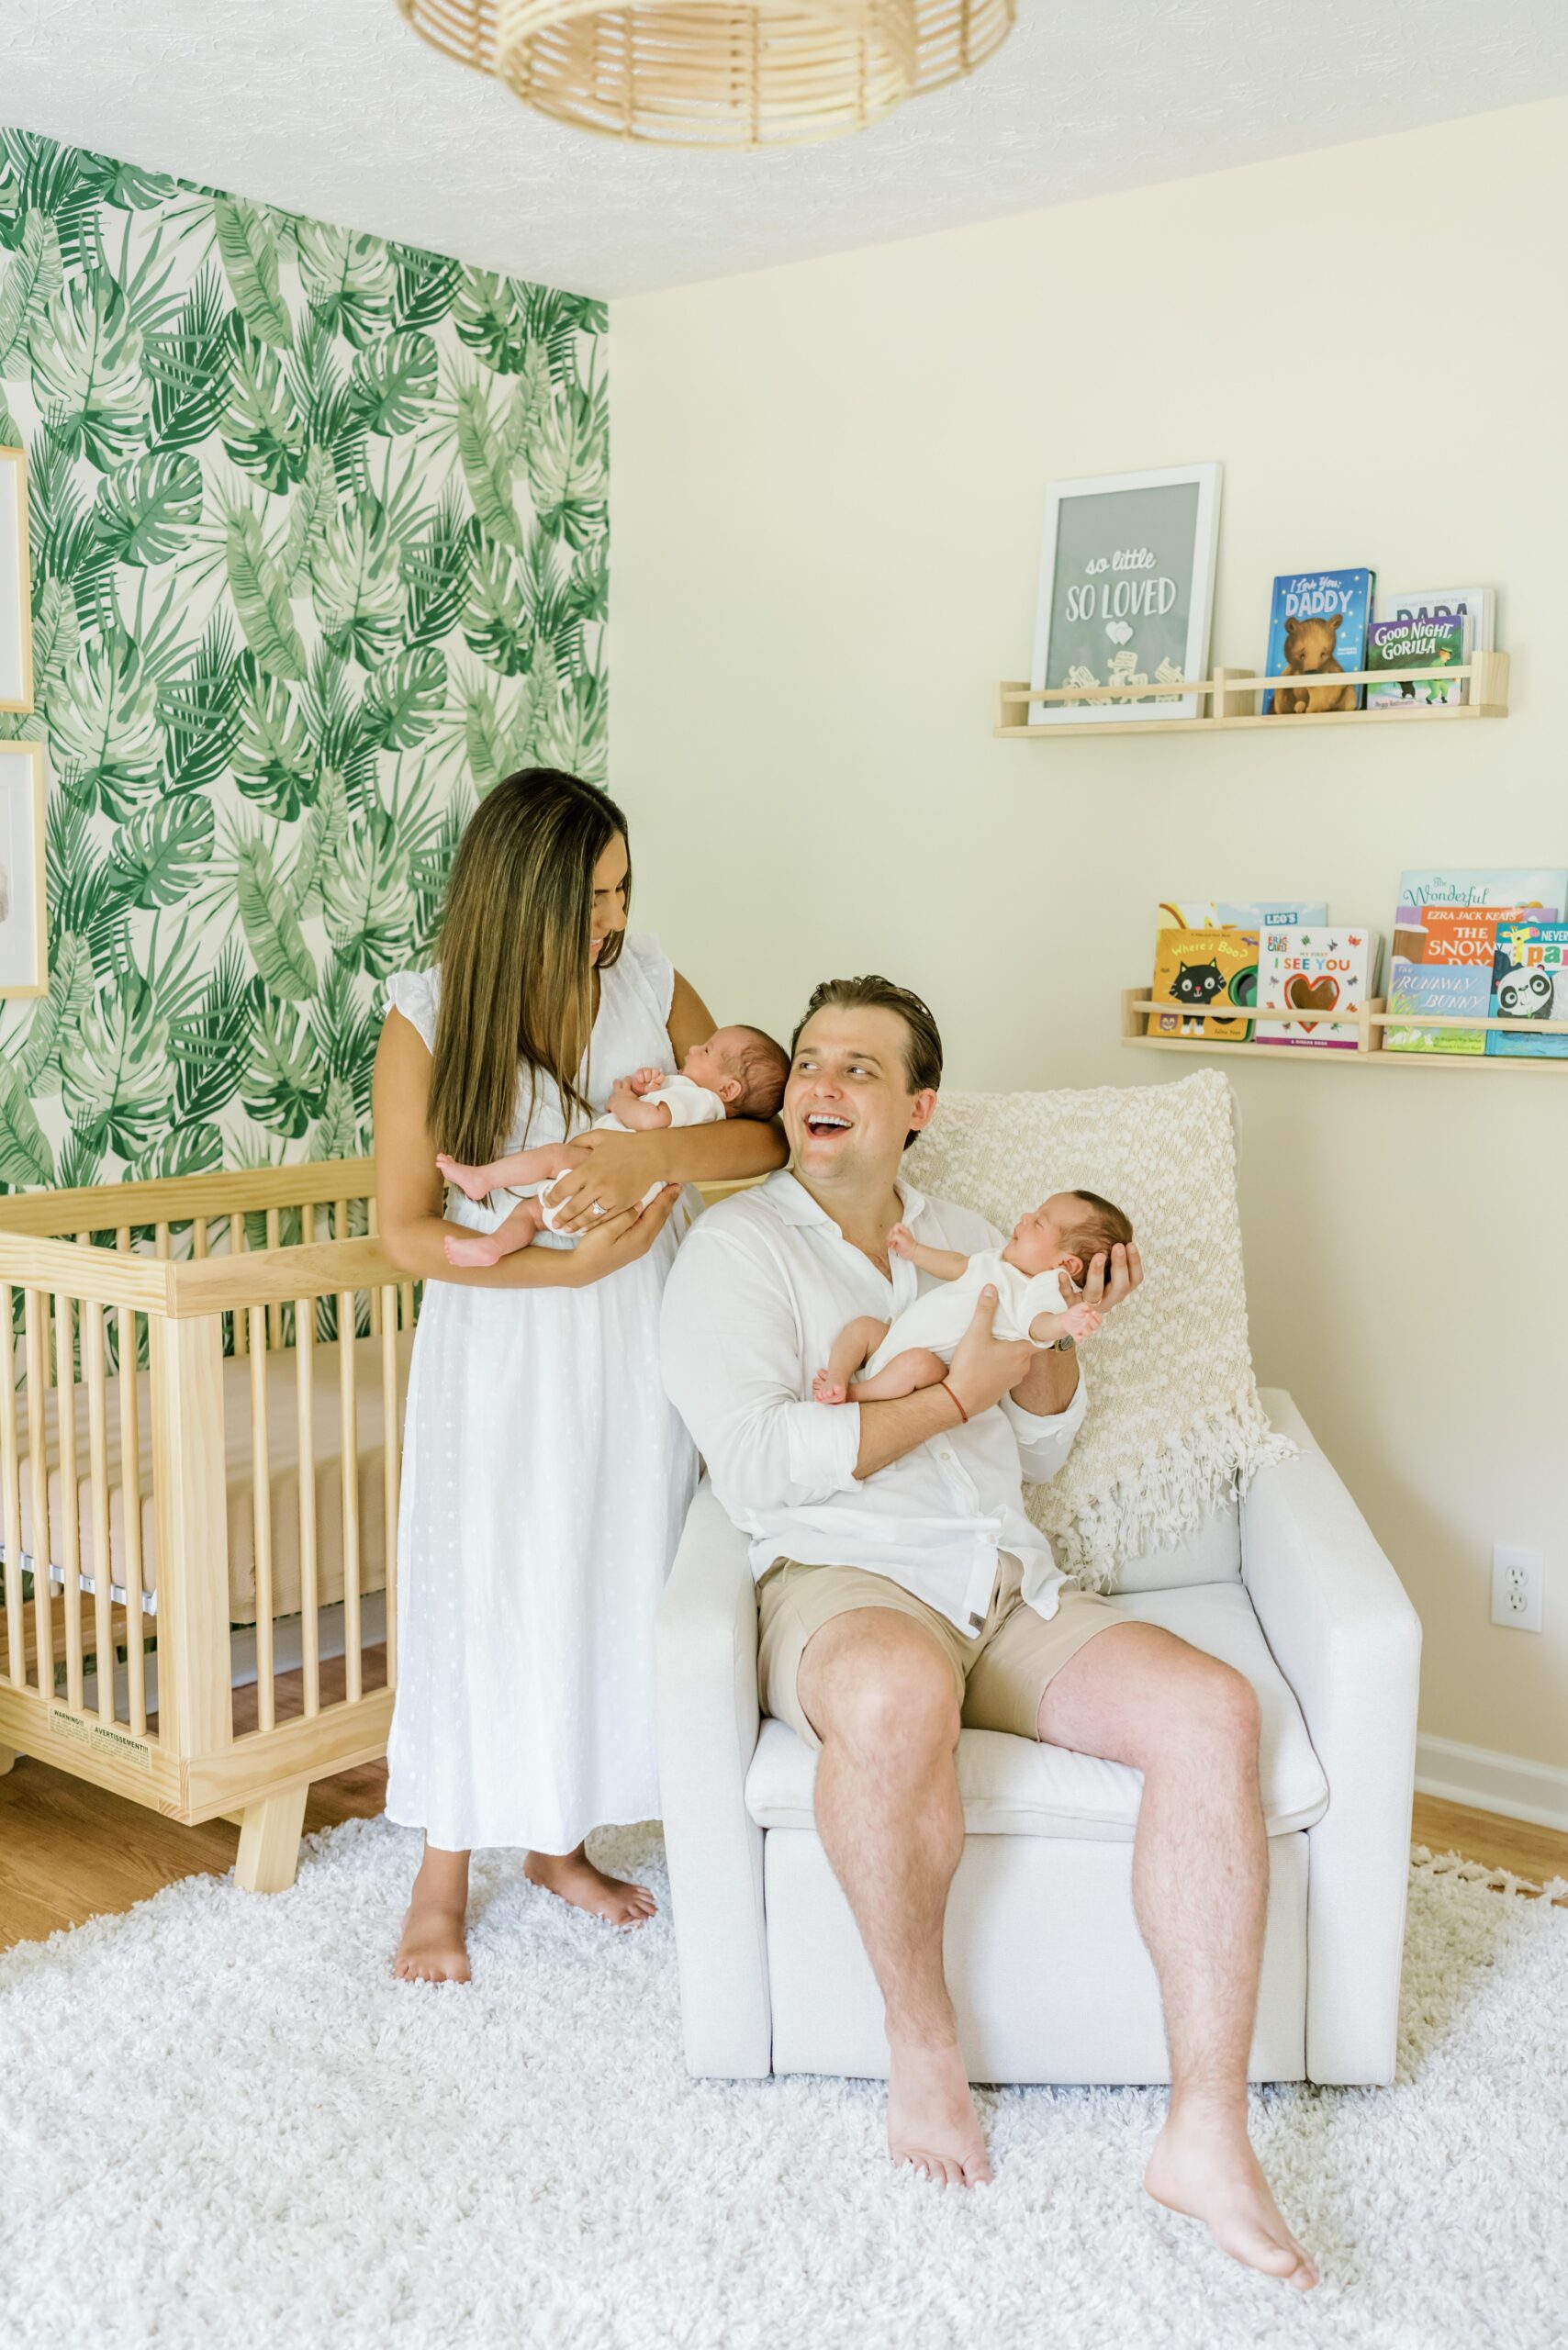 Mom and dad pose with twins at newborn session